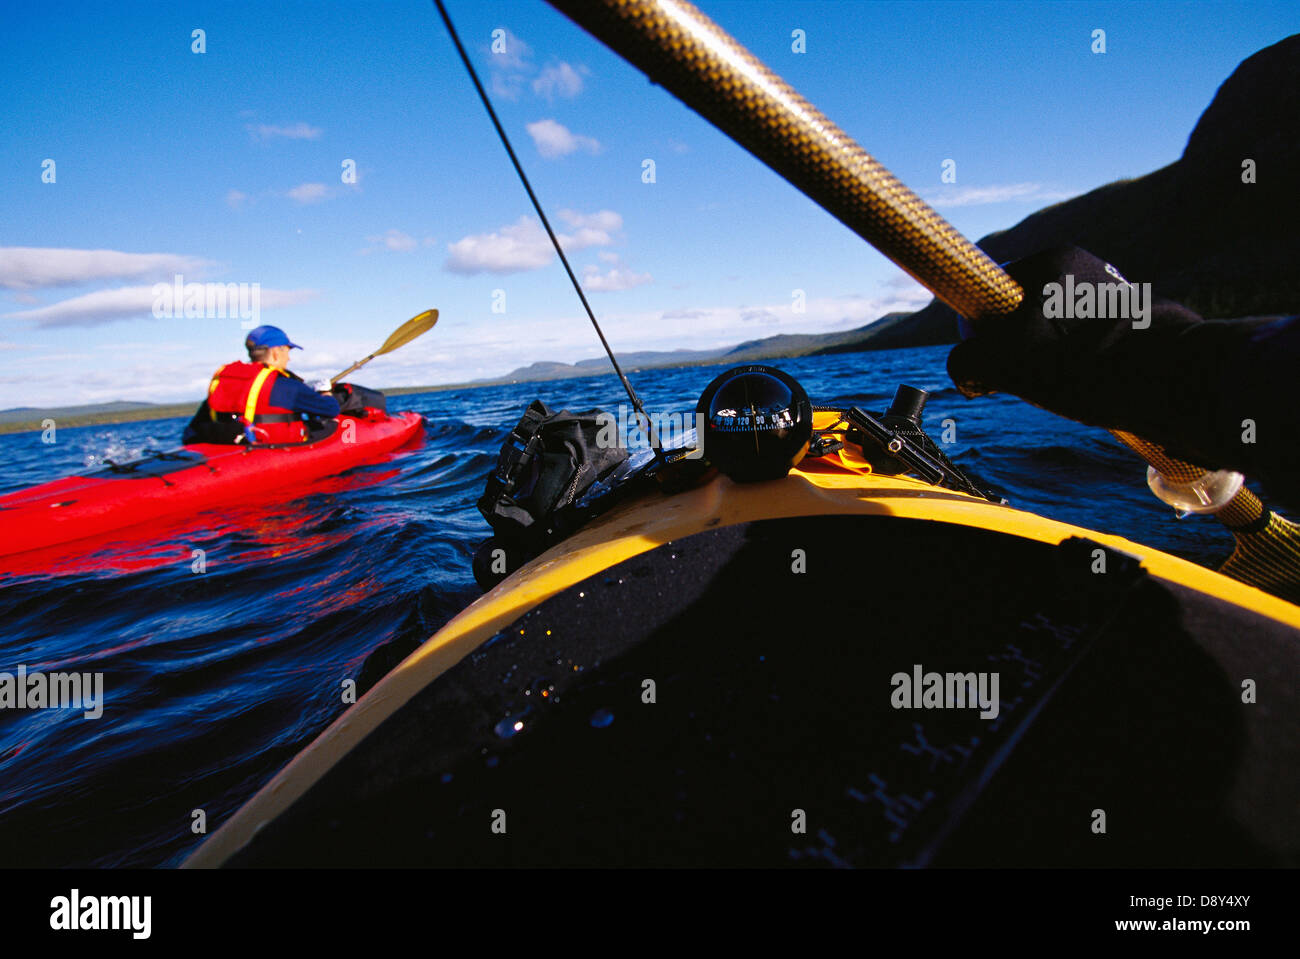 A man paddling a kayak seen from the front of another kayak. Stock Photo